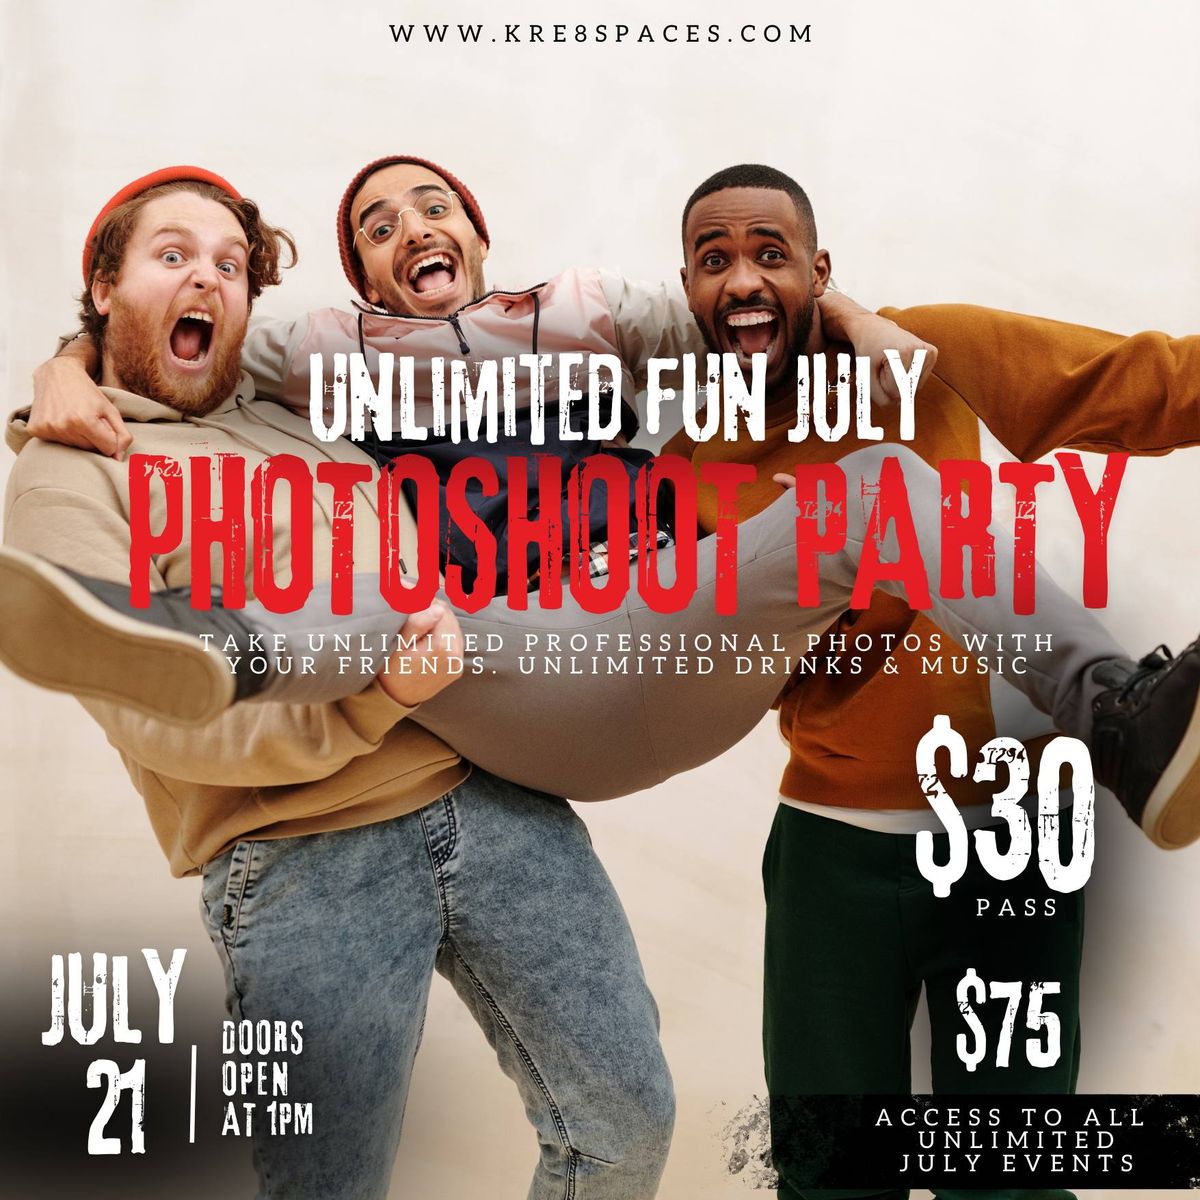 Unlimited Photoshoot Party